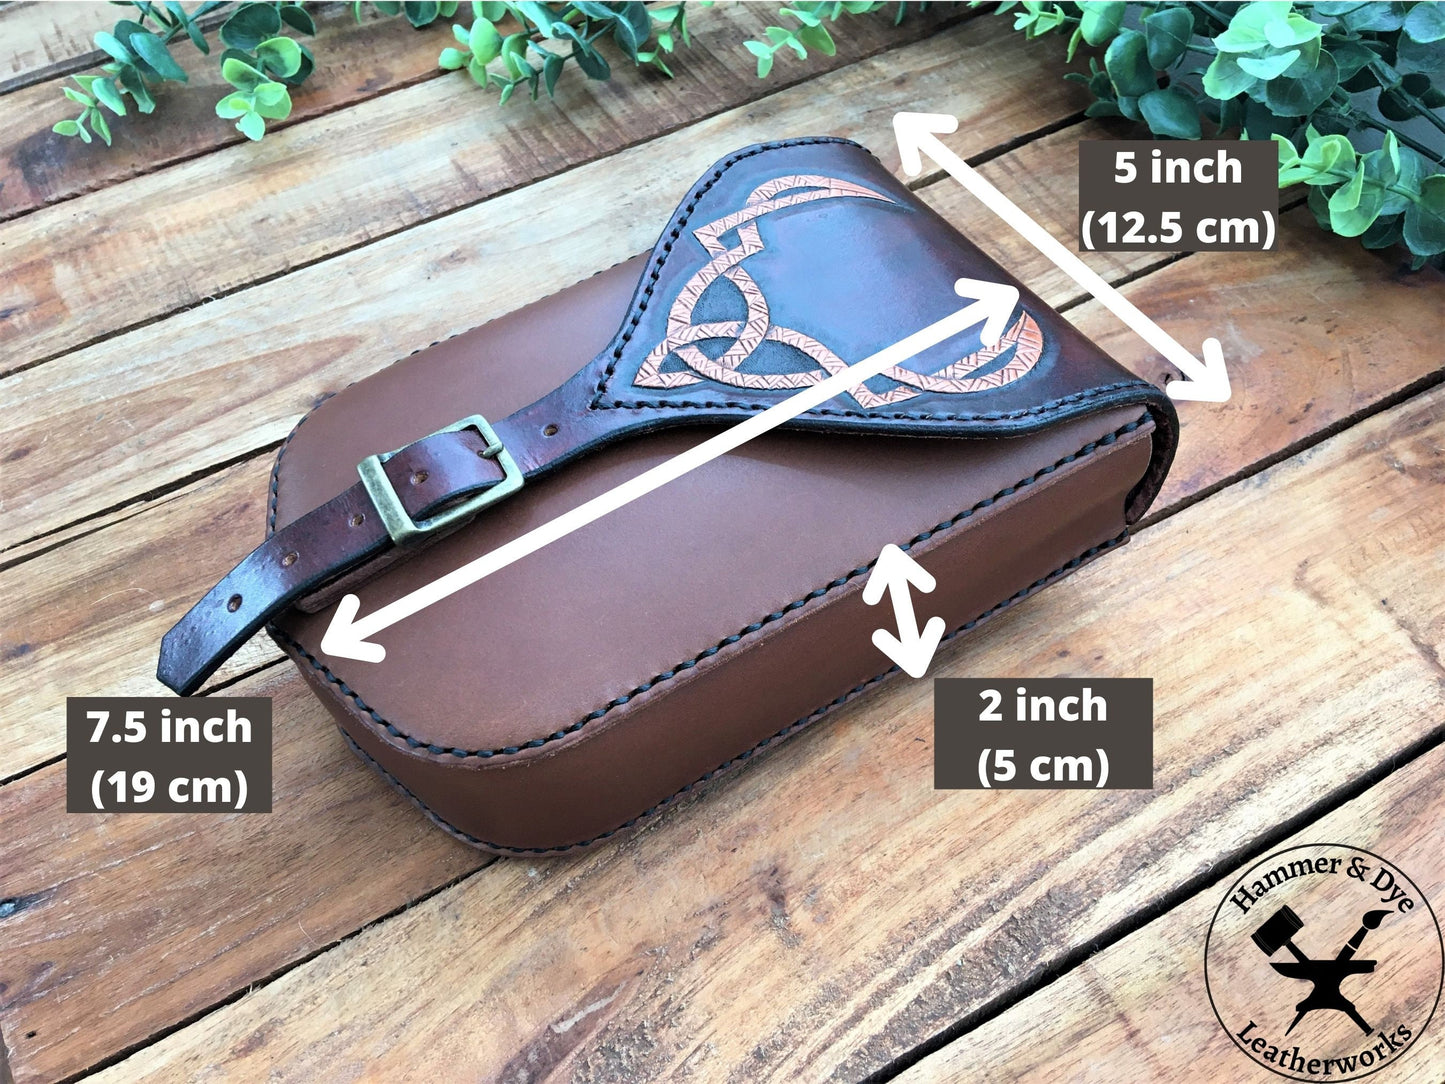 Large Handmade Brown Leather Belt Pouch with Buckle Closing and Viking Style Knotwork Carving With Sizing Guide